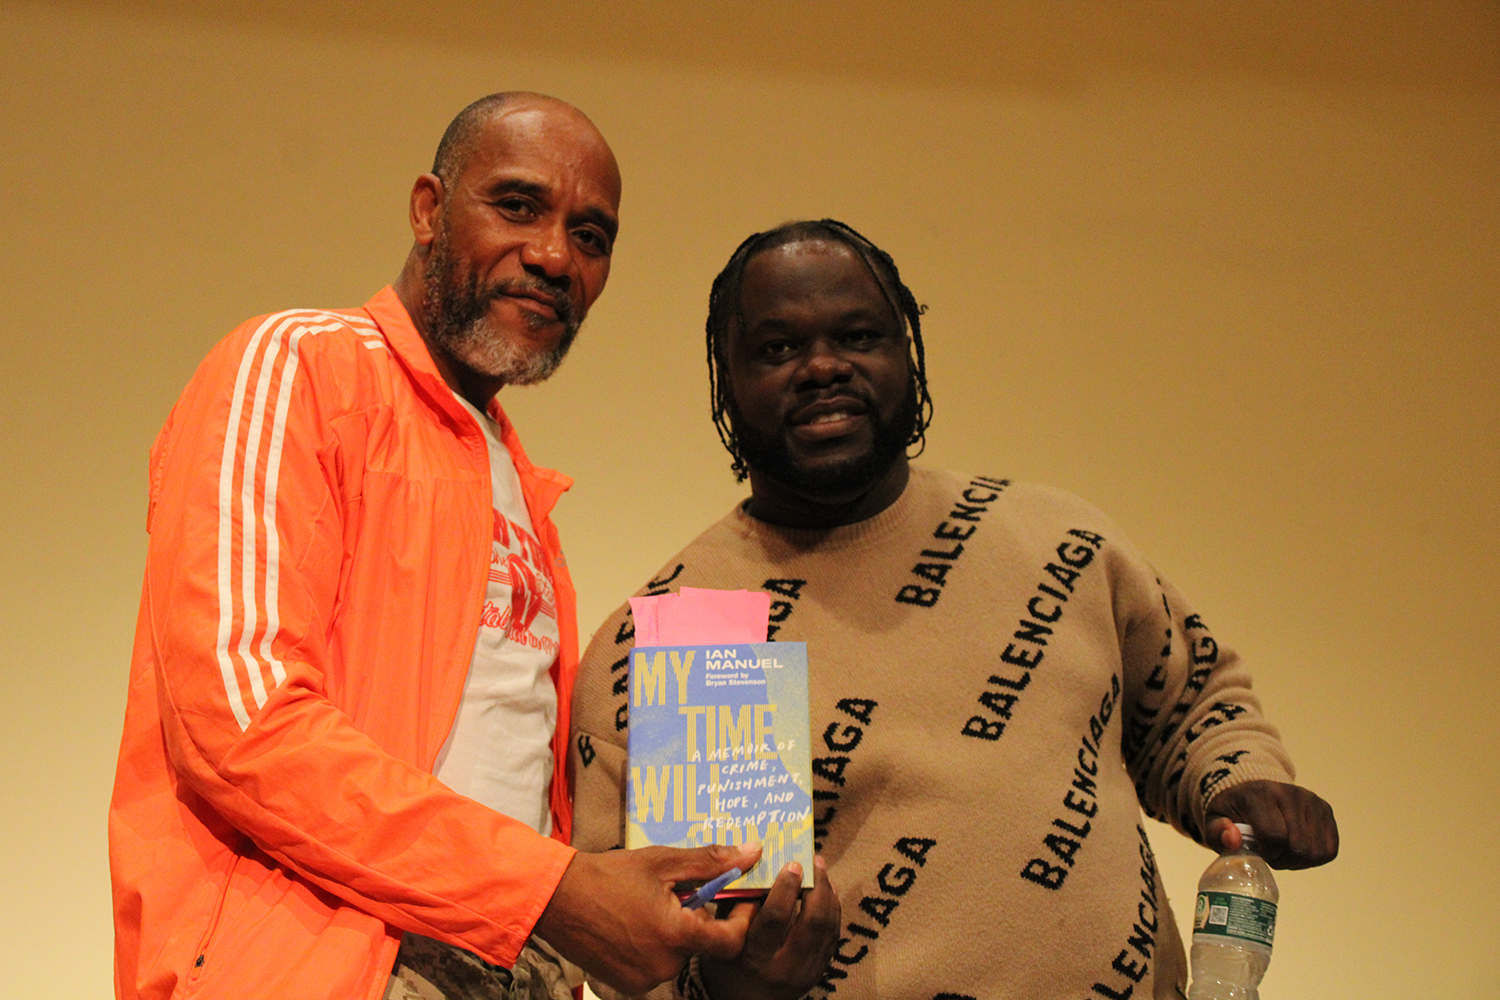 Two men hold a copy of a book with the title "My Time Will Come"